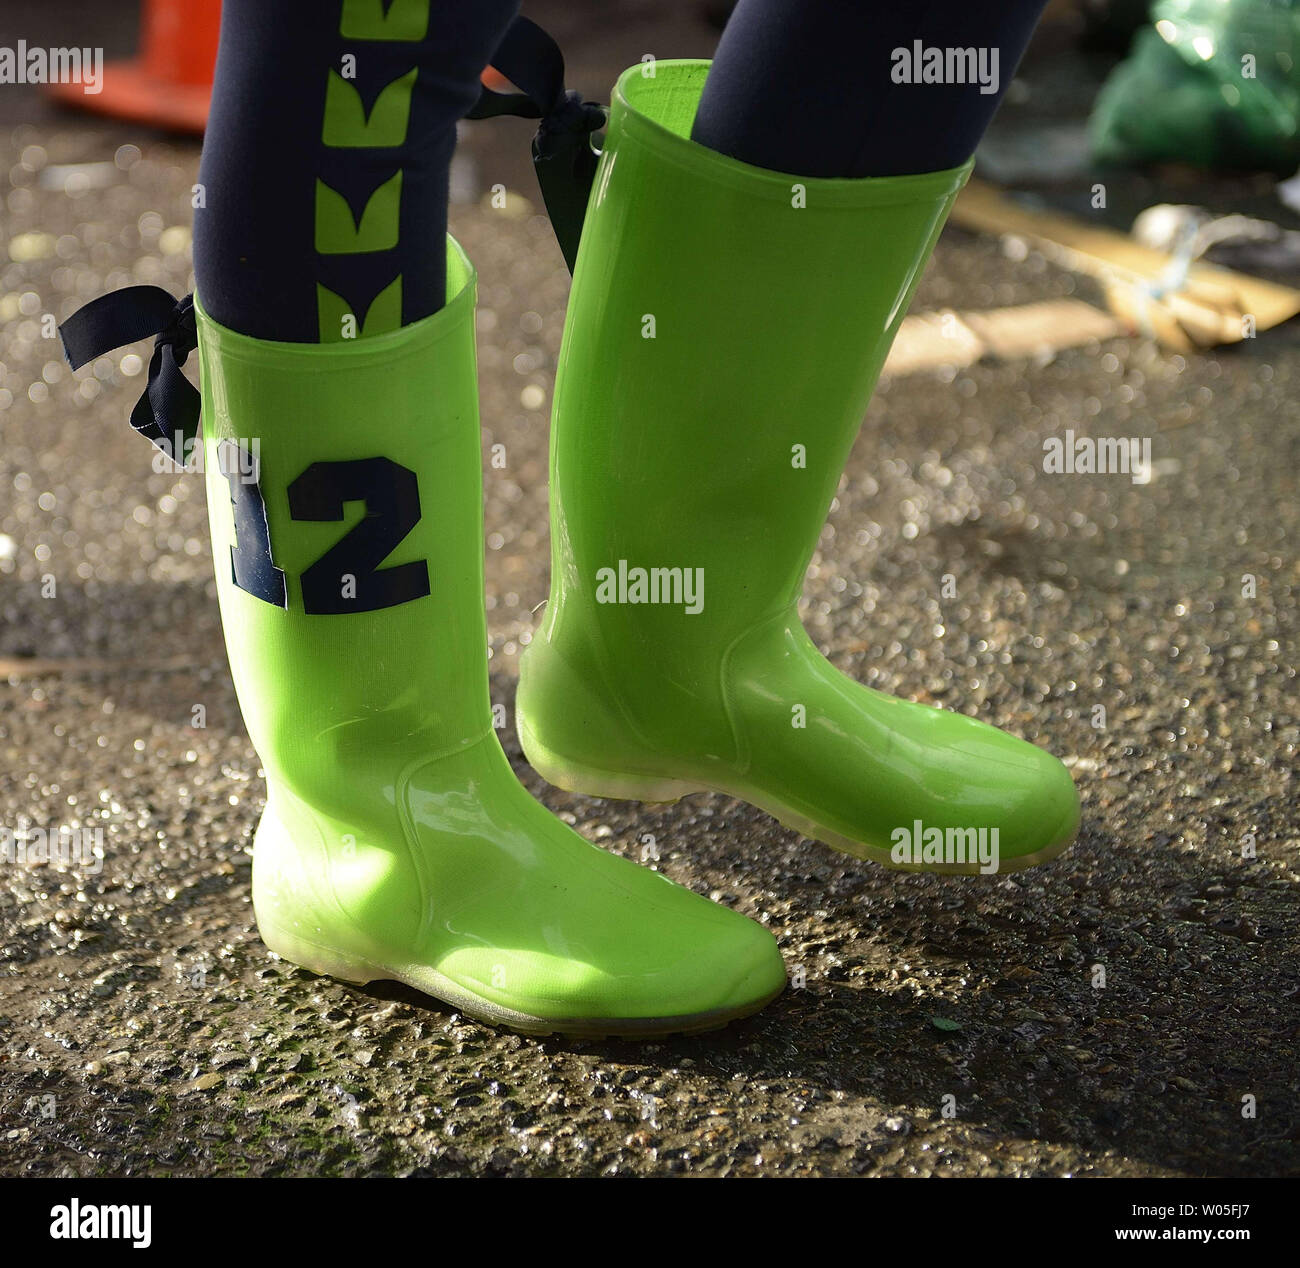 A Seattle Seahawks fan shows off her 12th Man boots before the start of a  game against the Green Bay Packers in the NFC Championship game at  CenturyLink Field in Seattle, Washington